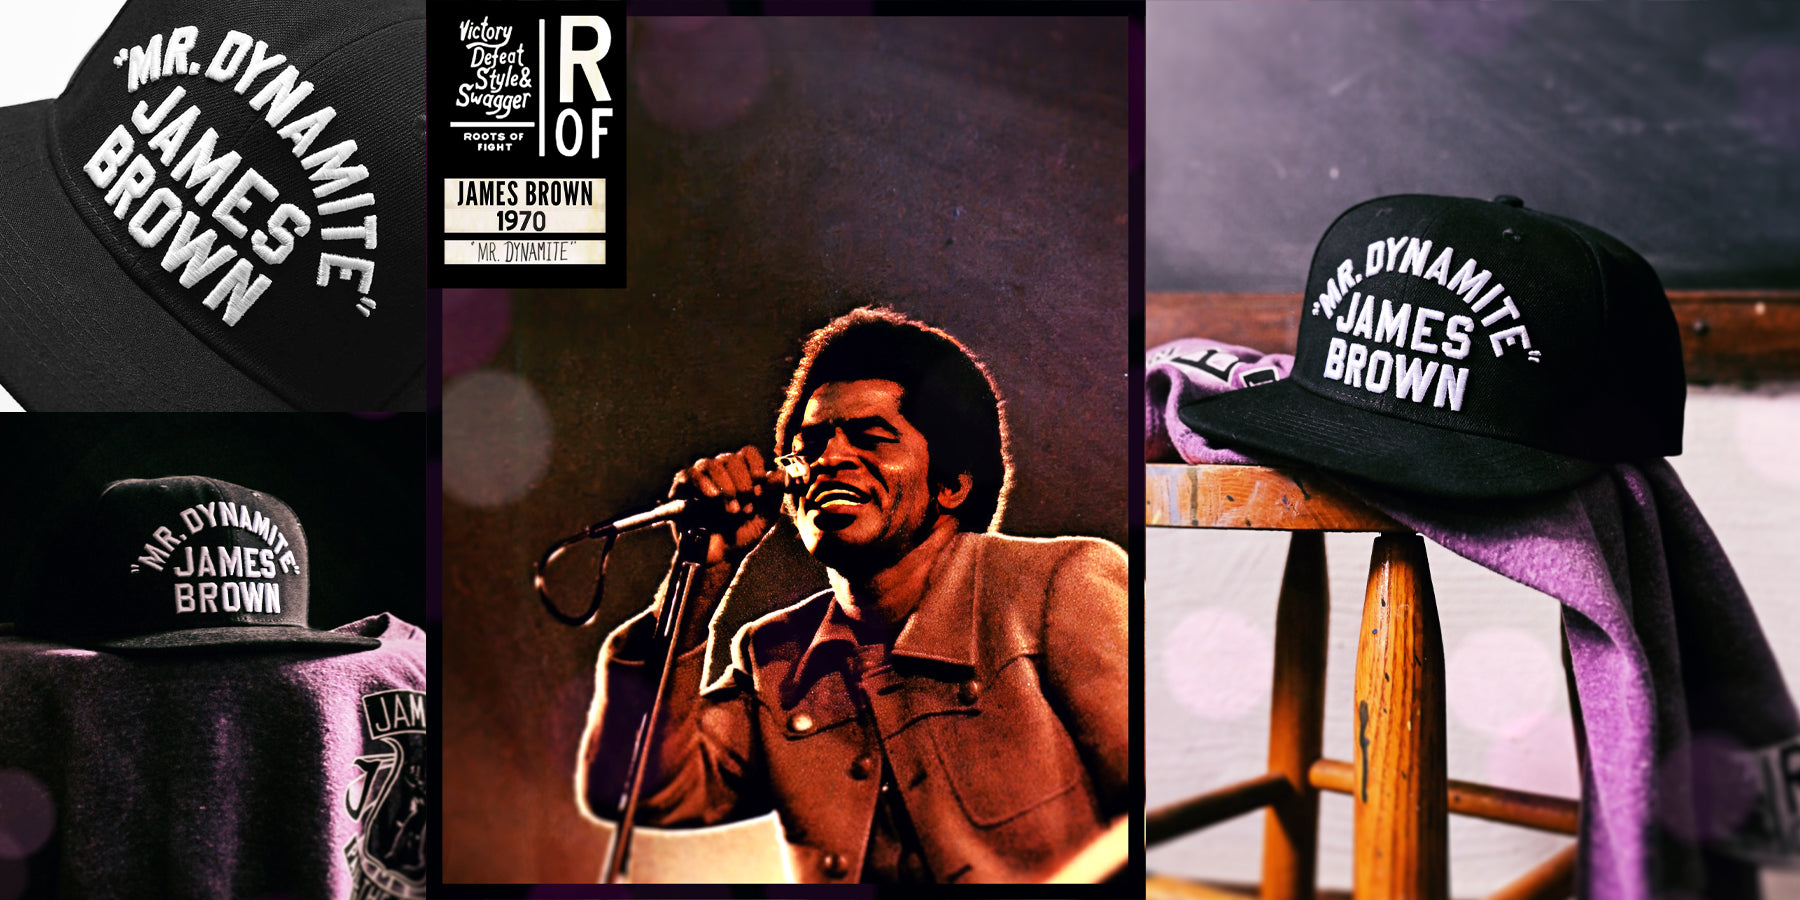 Montage of James Brown memorabilia and a performance photo, themed purple and black.